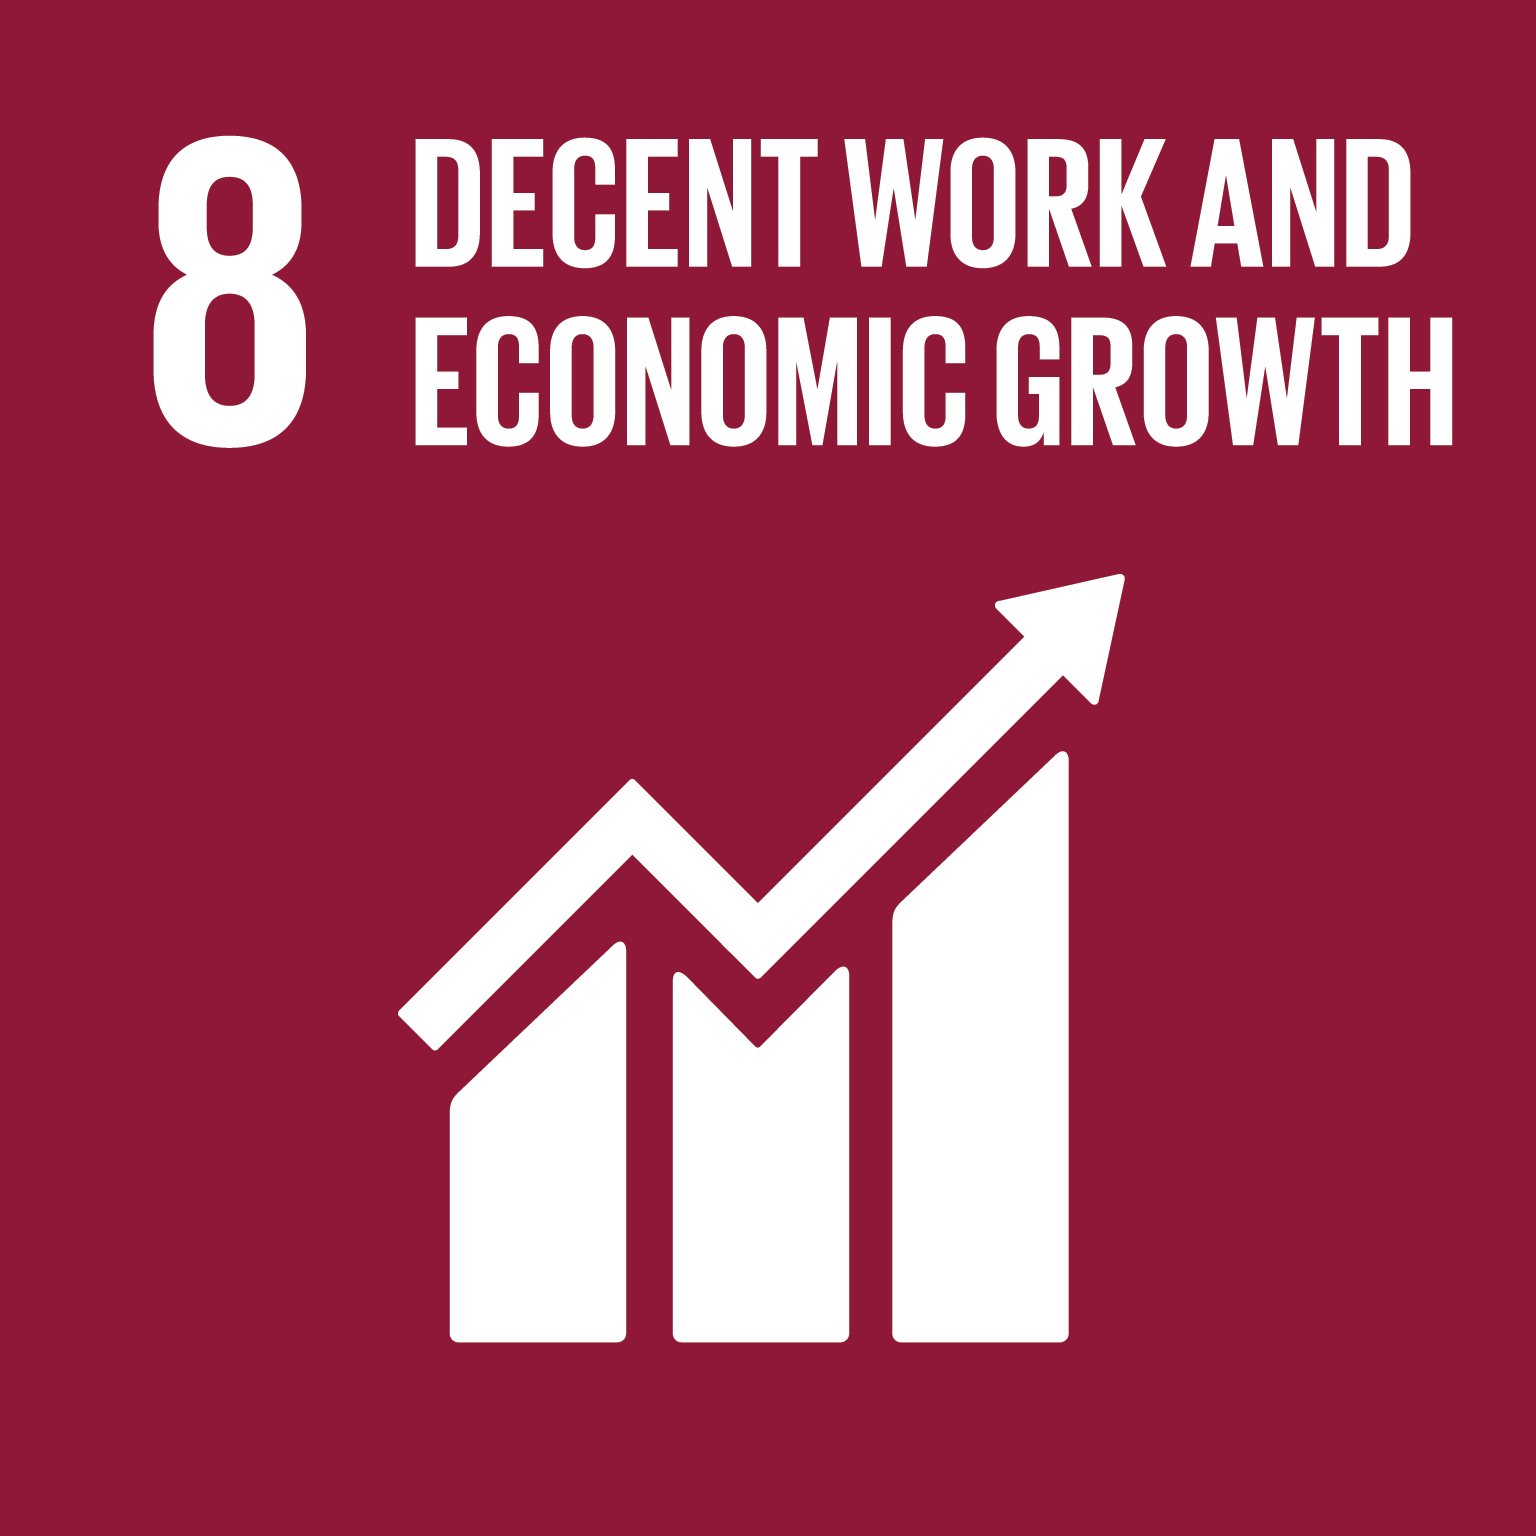 Promote sustained, inclusive and sustainable growth, full and productive employment, decent worl for all